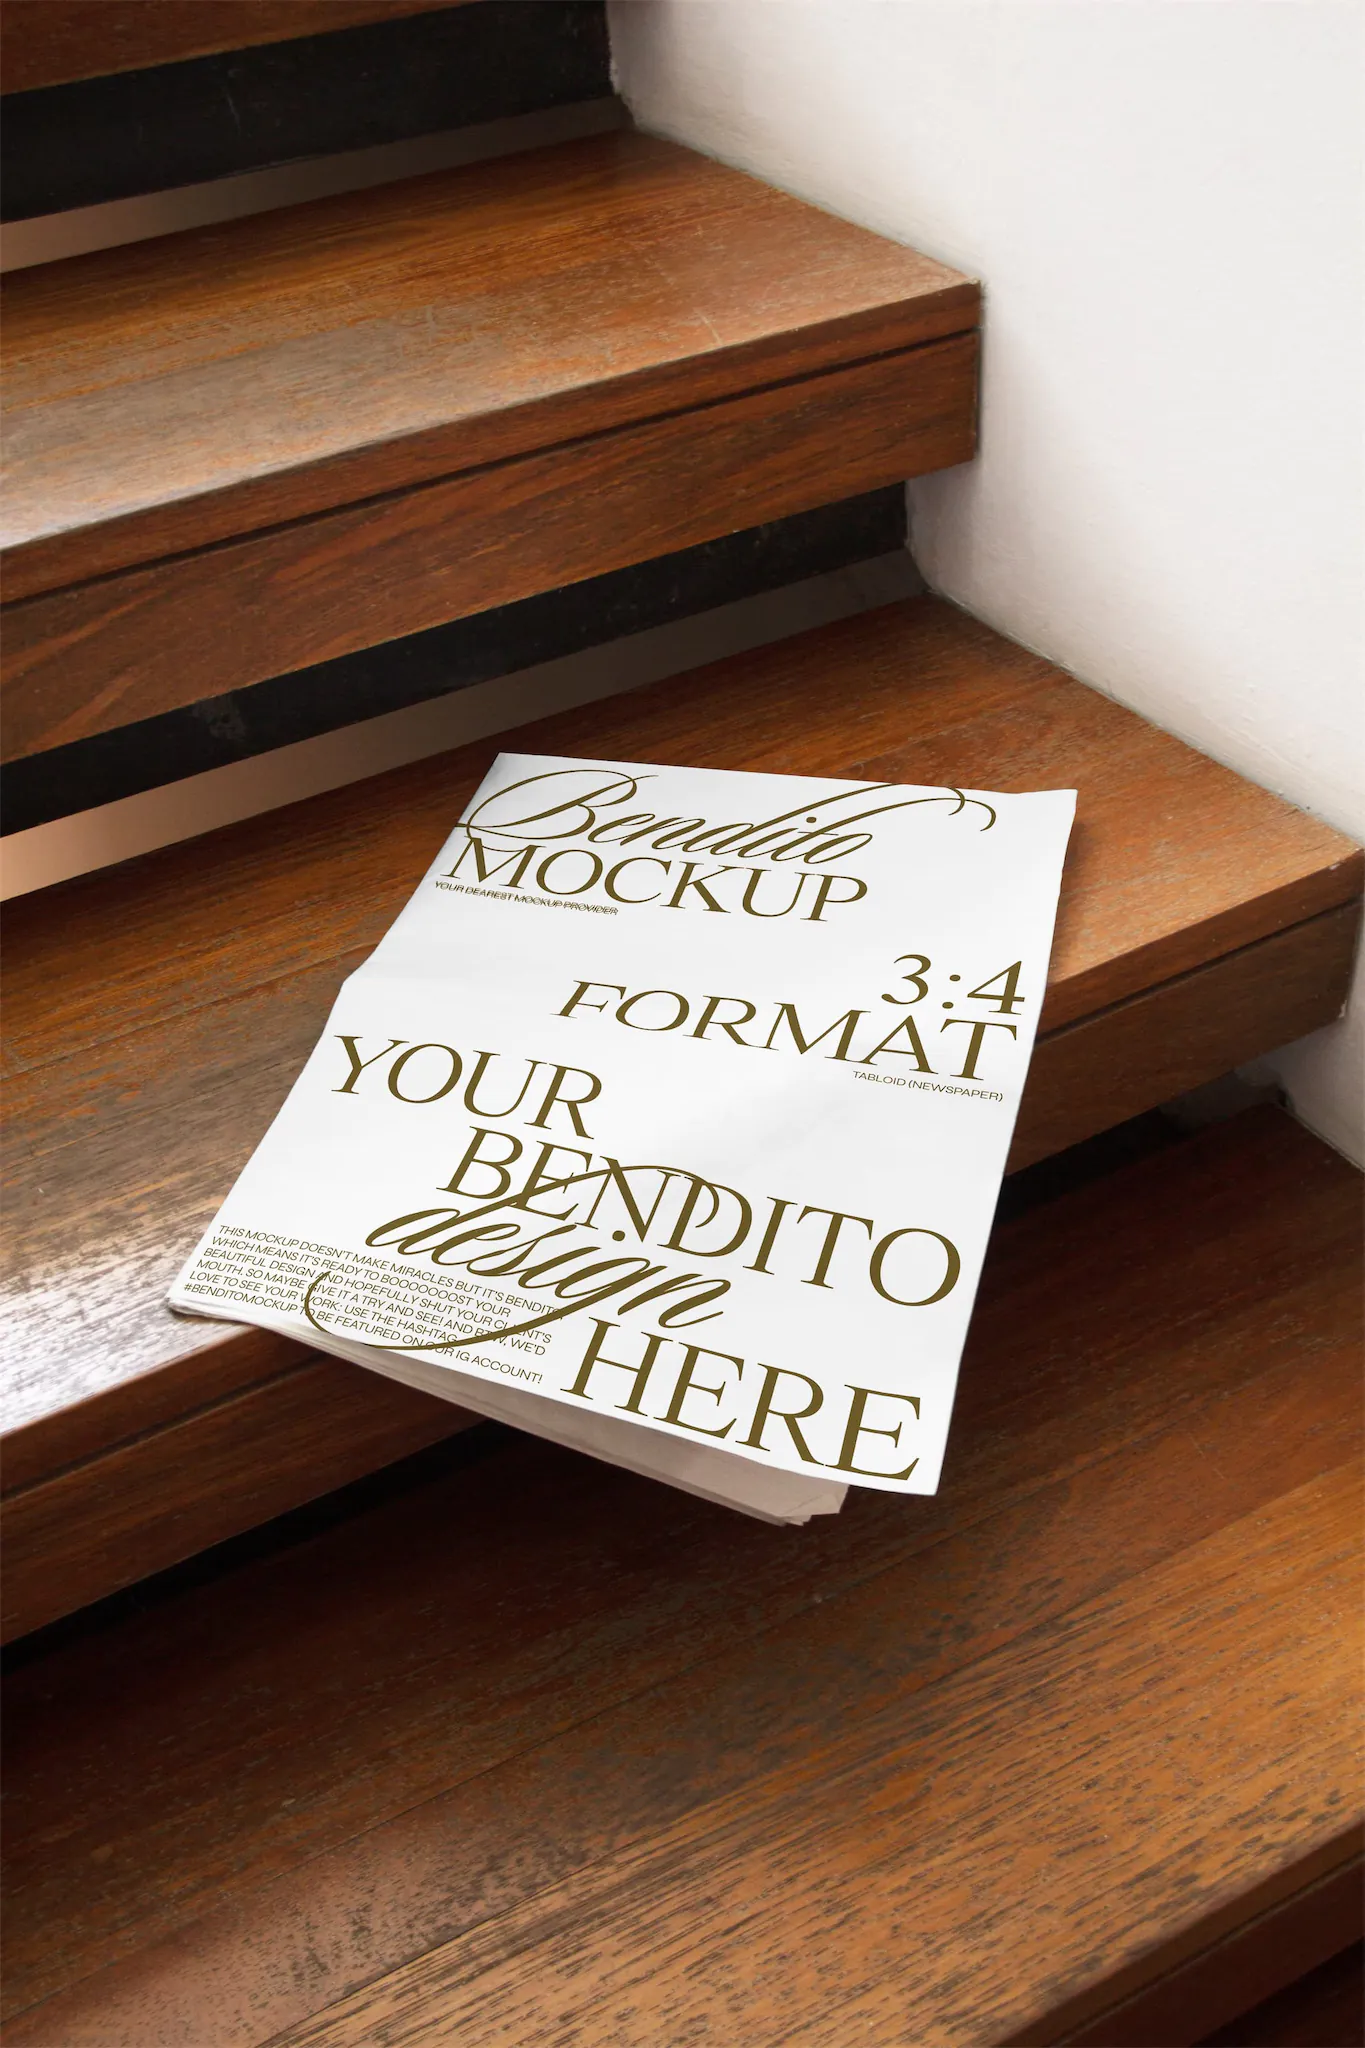 Newspaper mockup on wooden stairs.